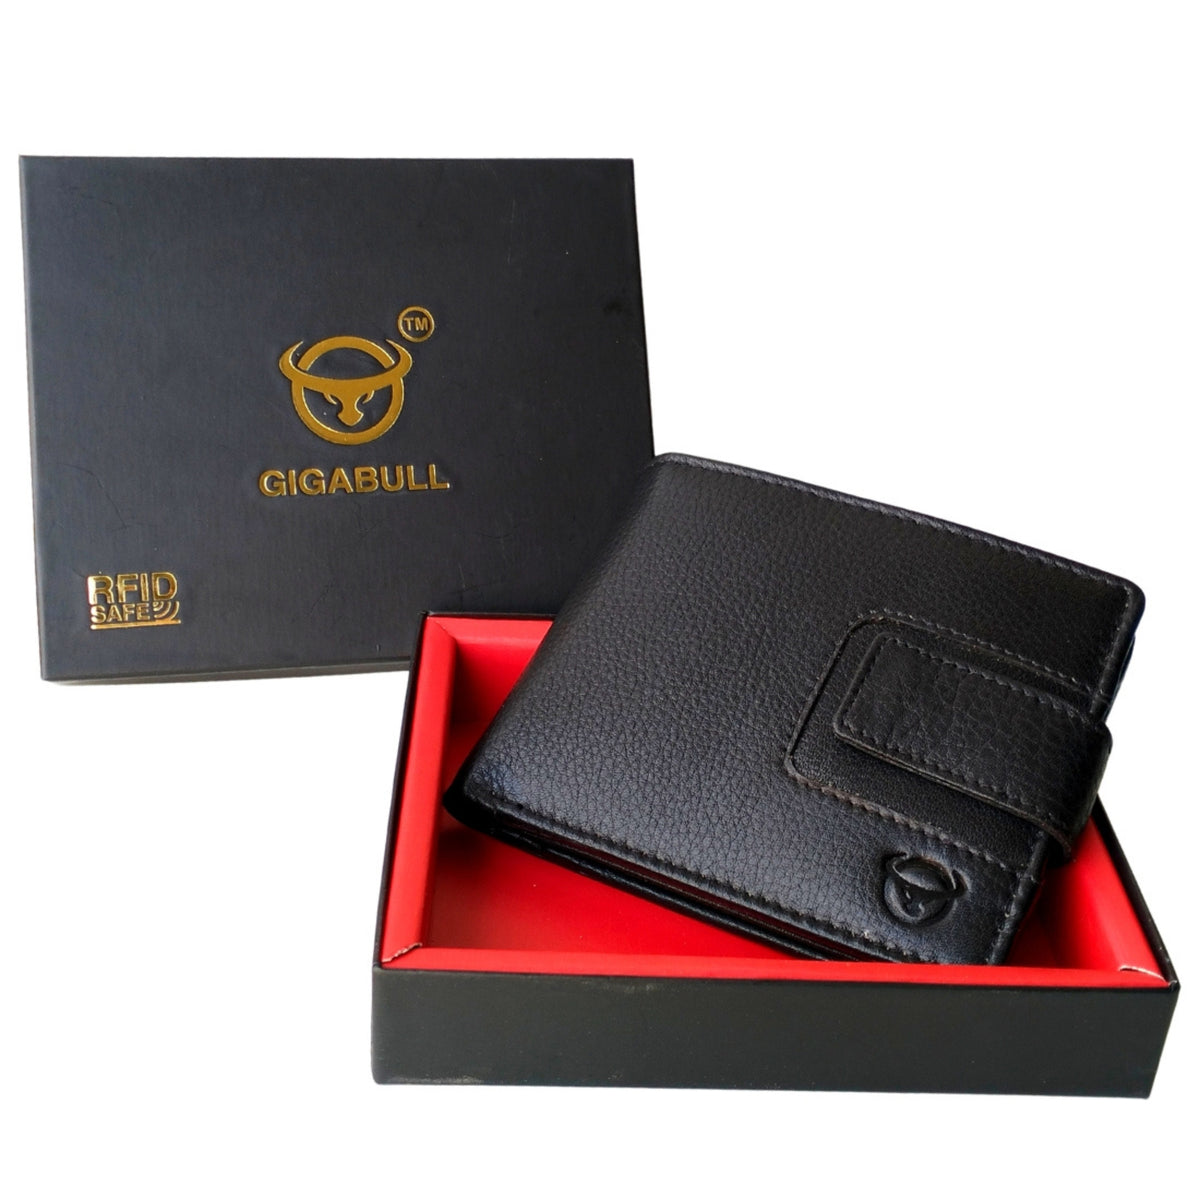 Black Color Blocking Leather Ultra Strong Stitching Wallet With 10 Credit Card Slots I 2 Currency Compartments I 1 Coin Pocket